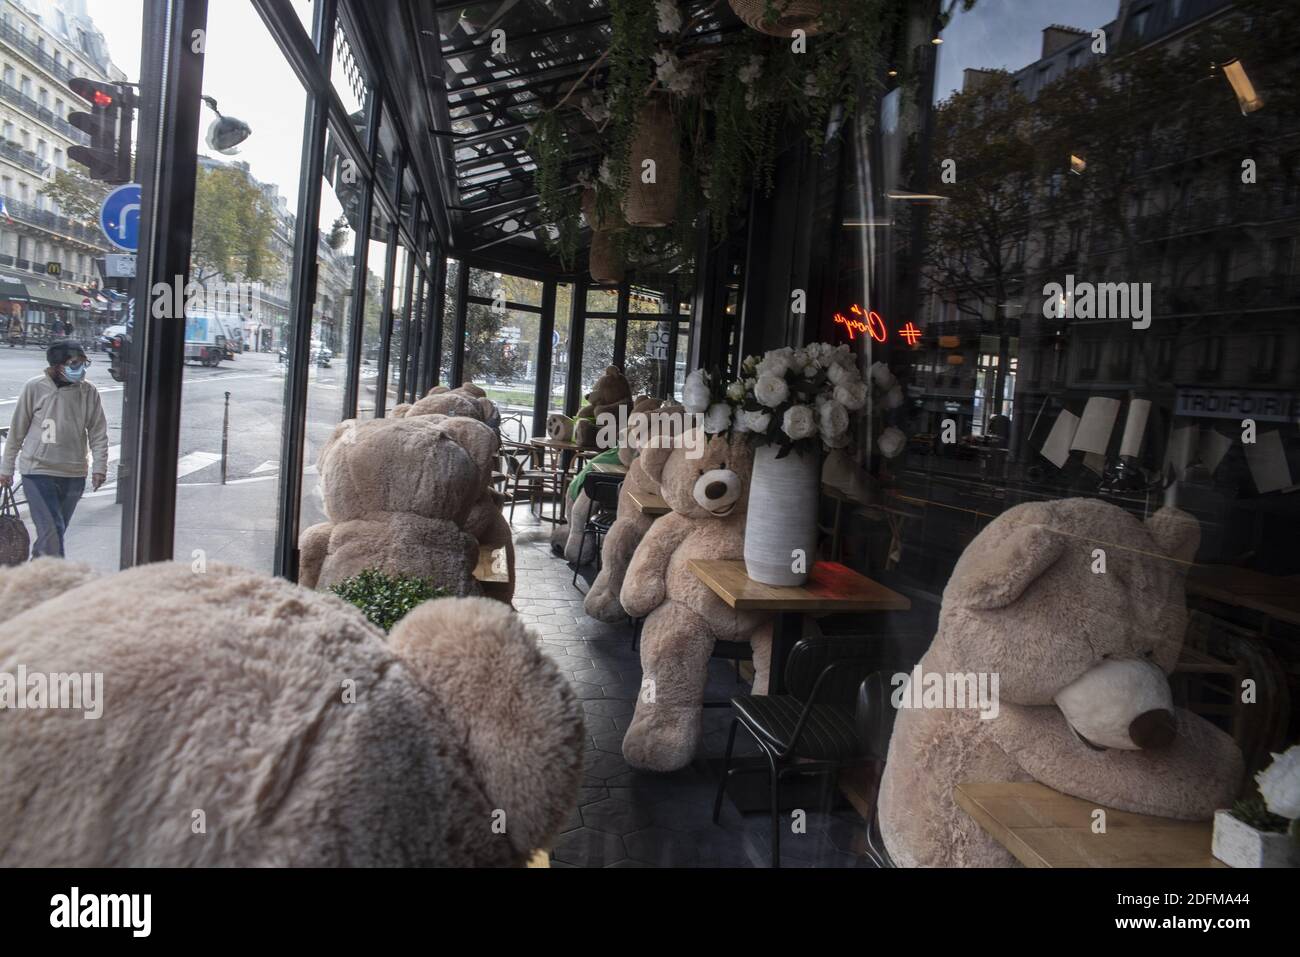 Le Choupinet cafe furnishing its interior with Teddy bears. 9th day of Lockdown during the second wave of COVID-19 pandemic at Luxembourg park, less crowded than usual for a beautiful day. Paris, France, on November 07, 2020. Photo by Pierrick Villette/Avenir Pictures/ABACAPRESS.COM Stock Photo